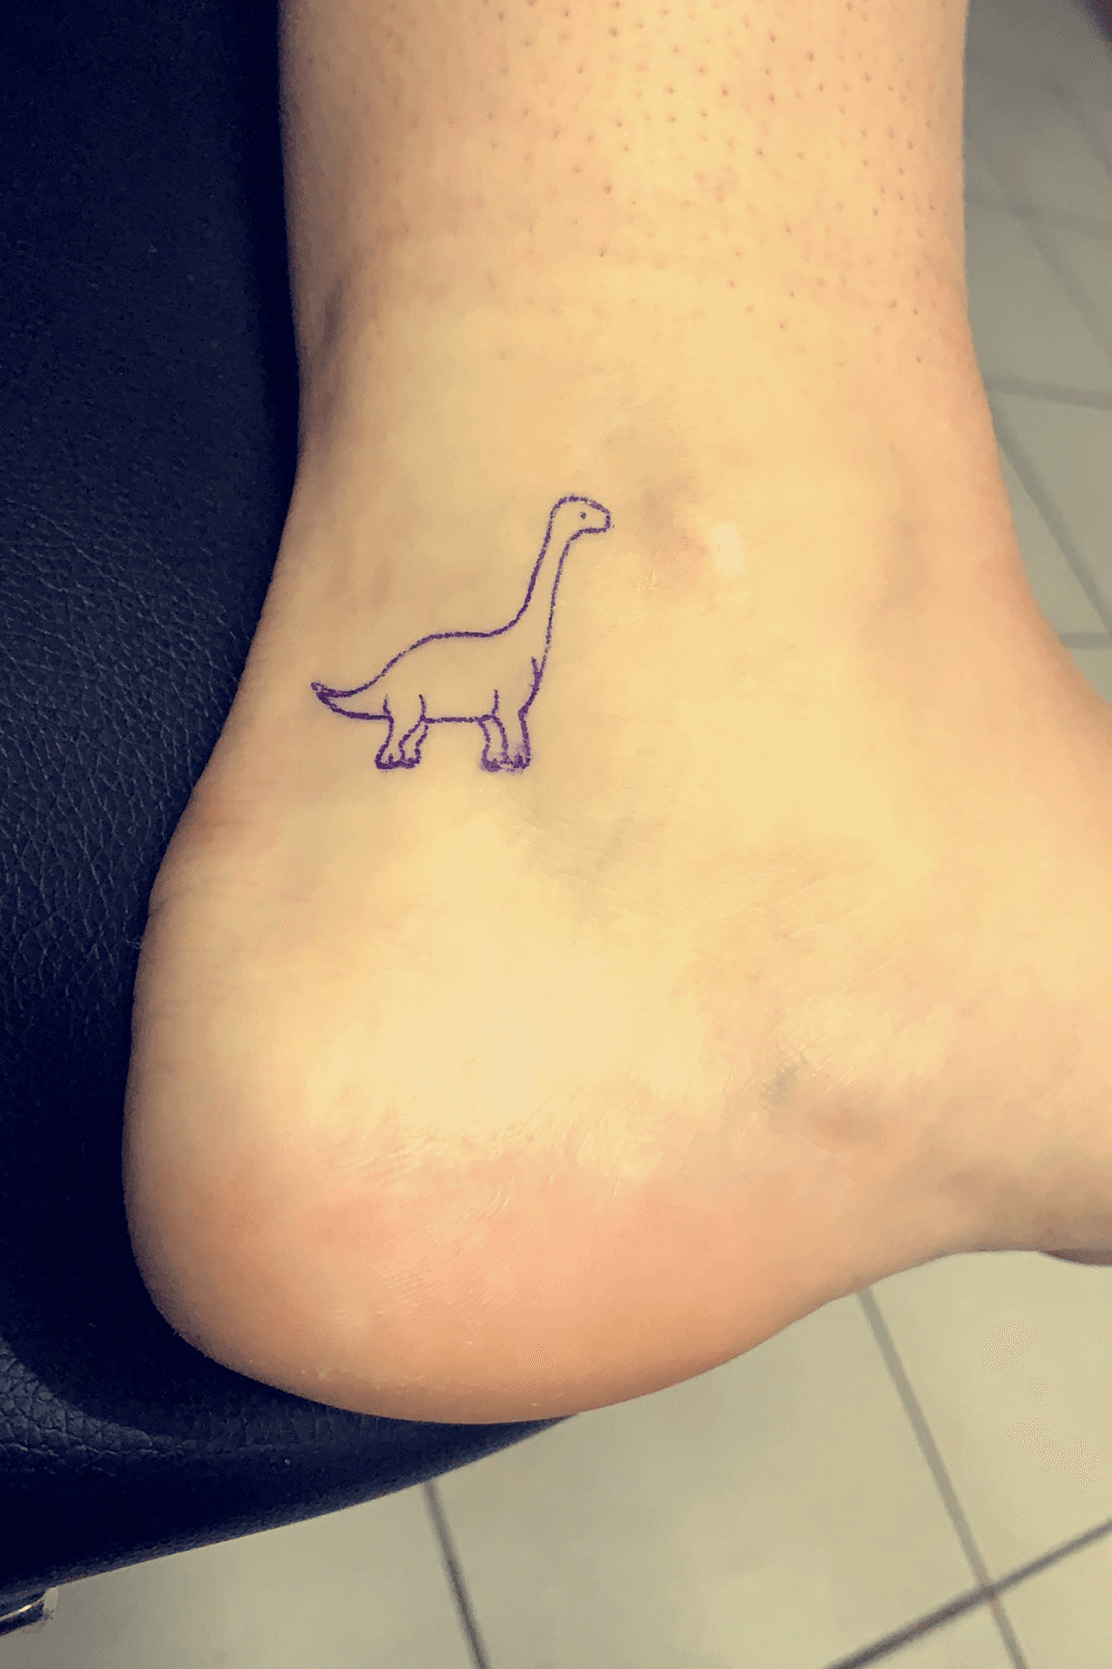 My The Land Before Time Longneck Tattoo by Lee  Family Tradition Tattoo  Puyallup WA  Tattoo for son Dinasour tattoo Mini tattoos